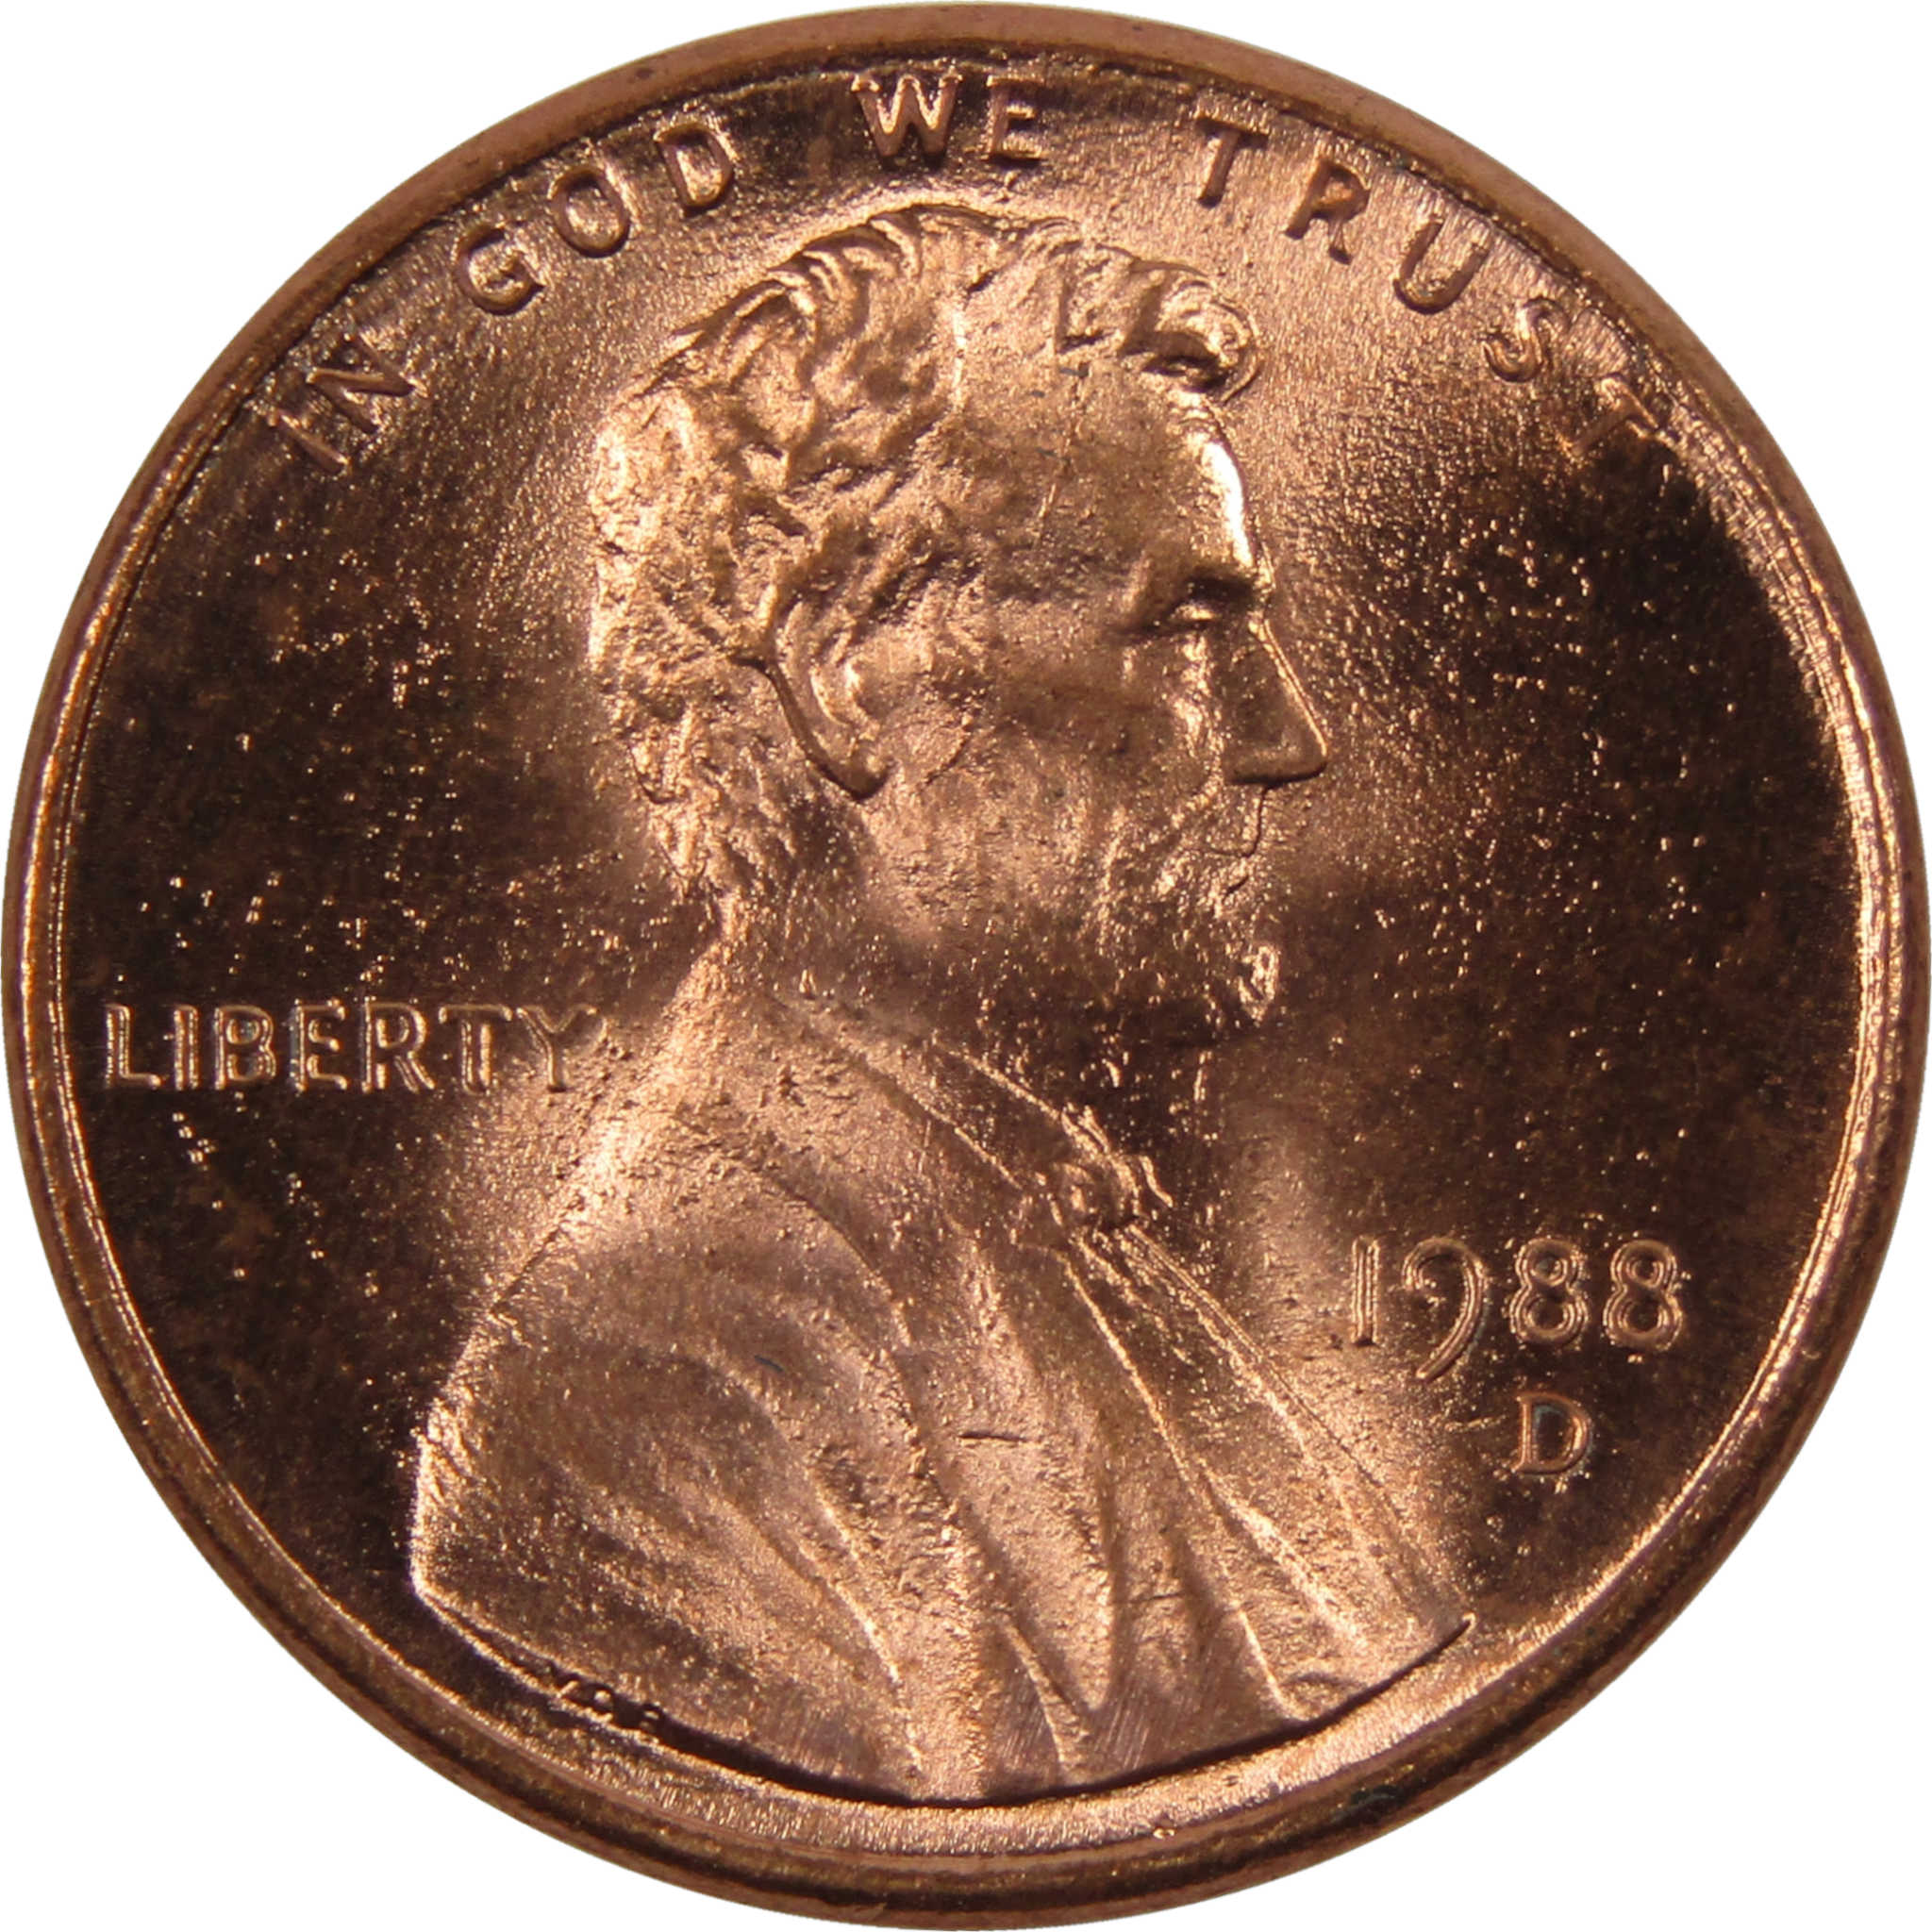 1988 D Lincoln Memorial Cent BU Uncirculated Penny 1c Coin